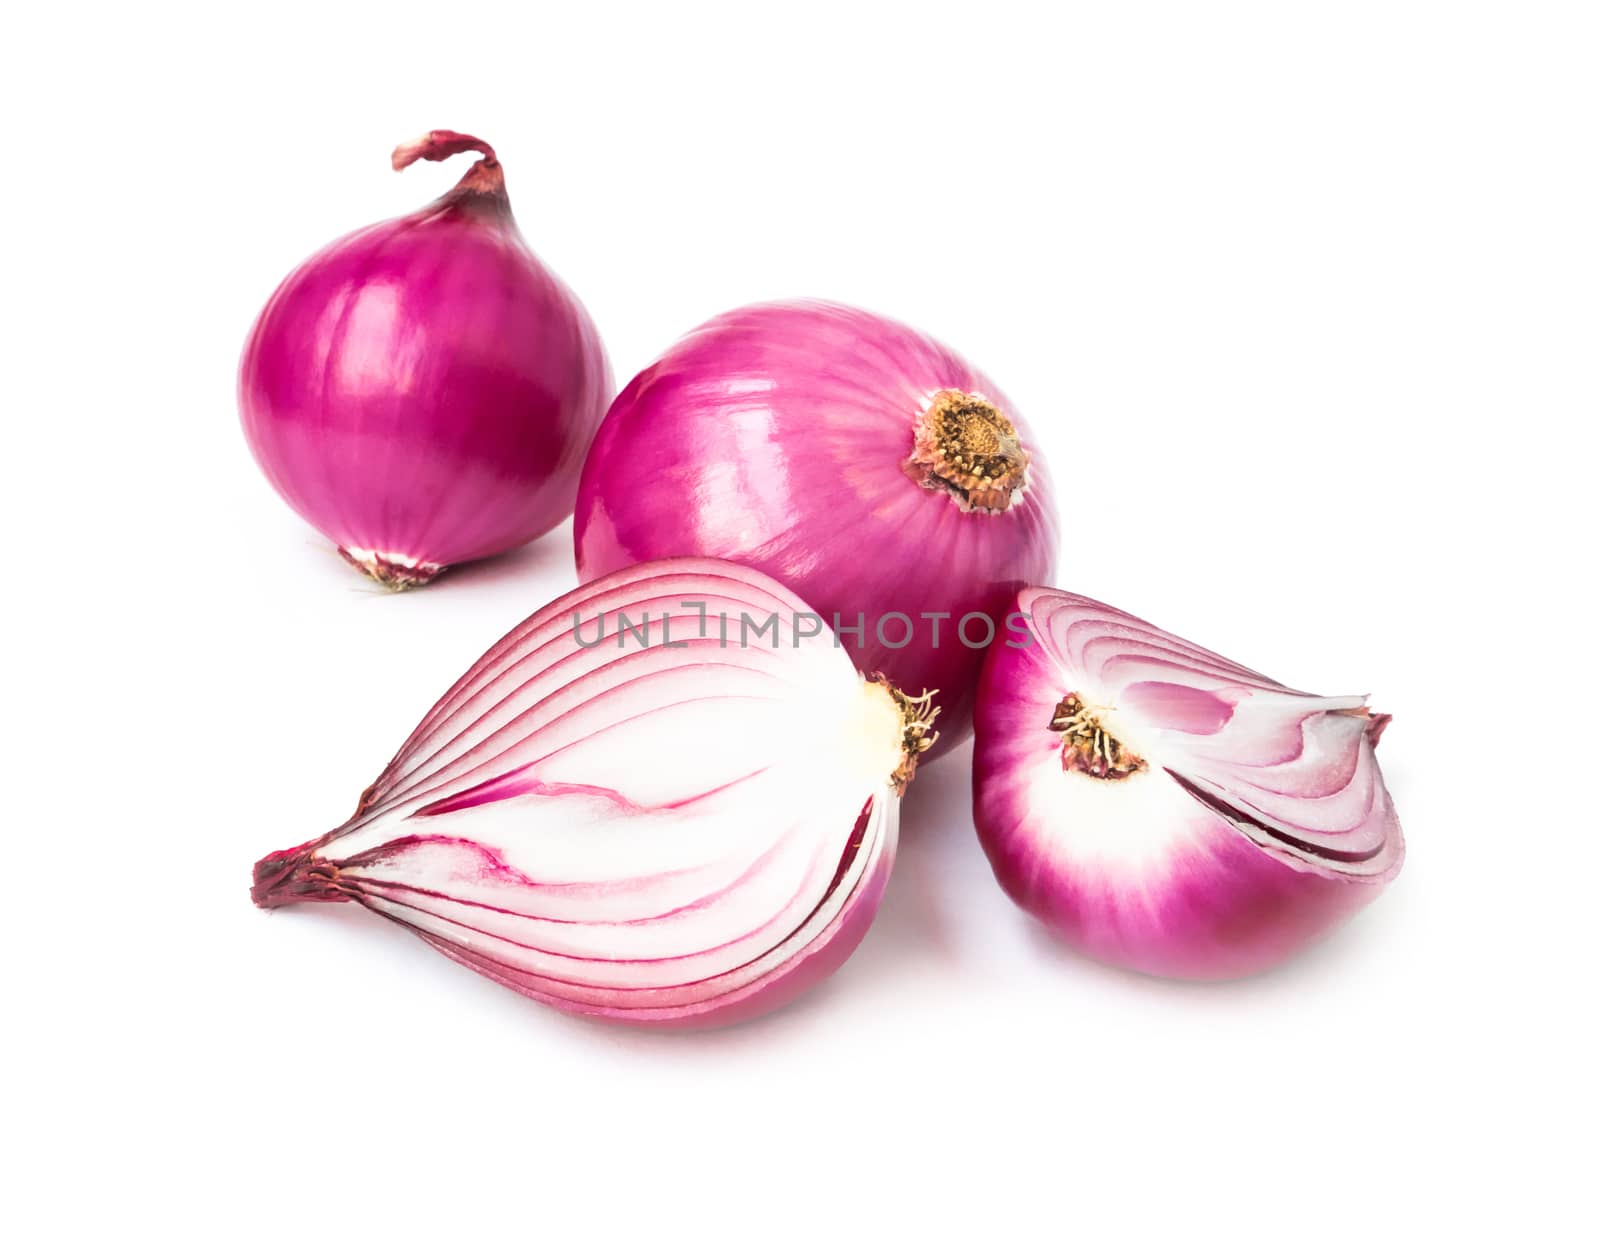 Red onion and slice on white background, raw material for make cooking